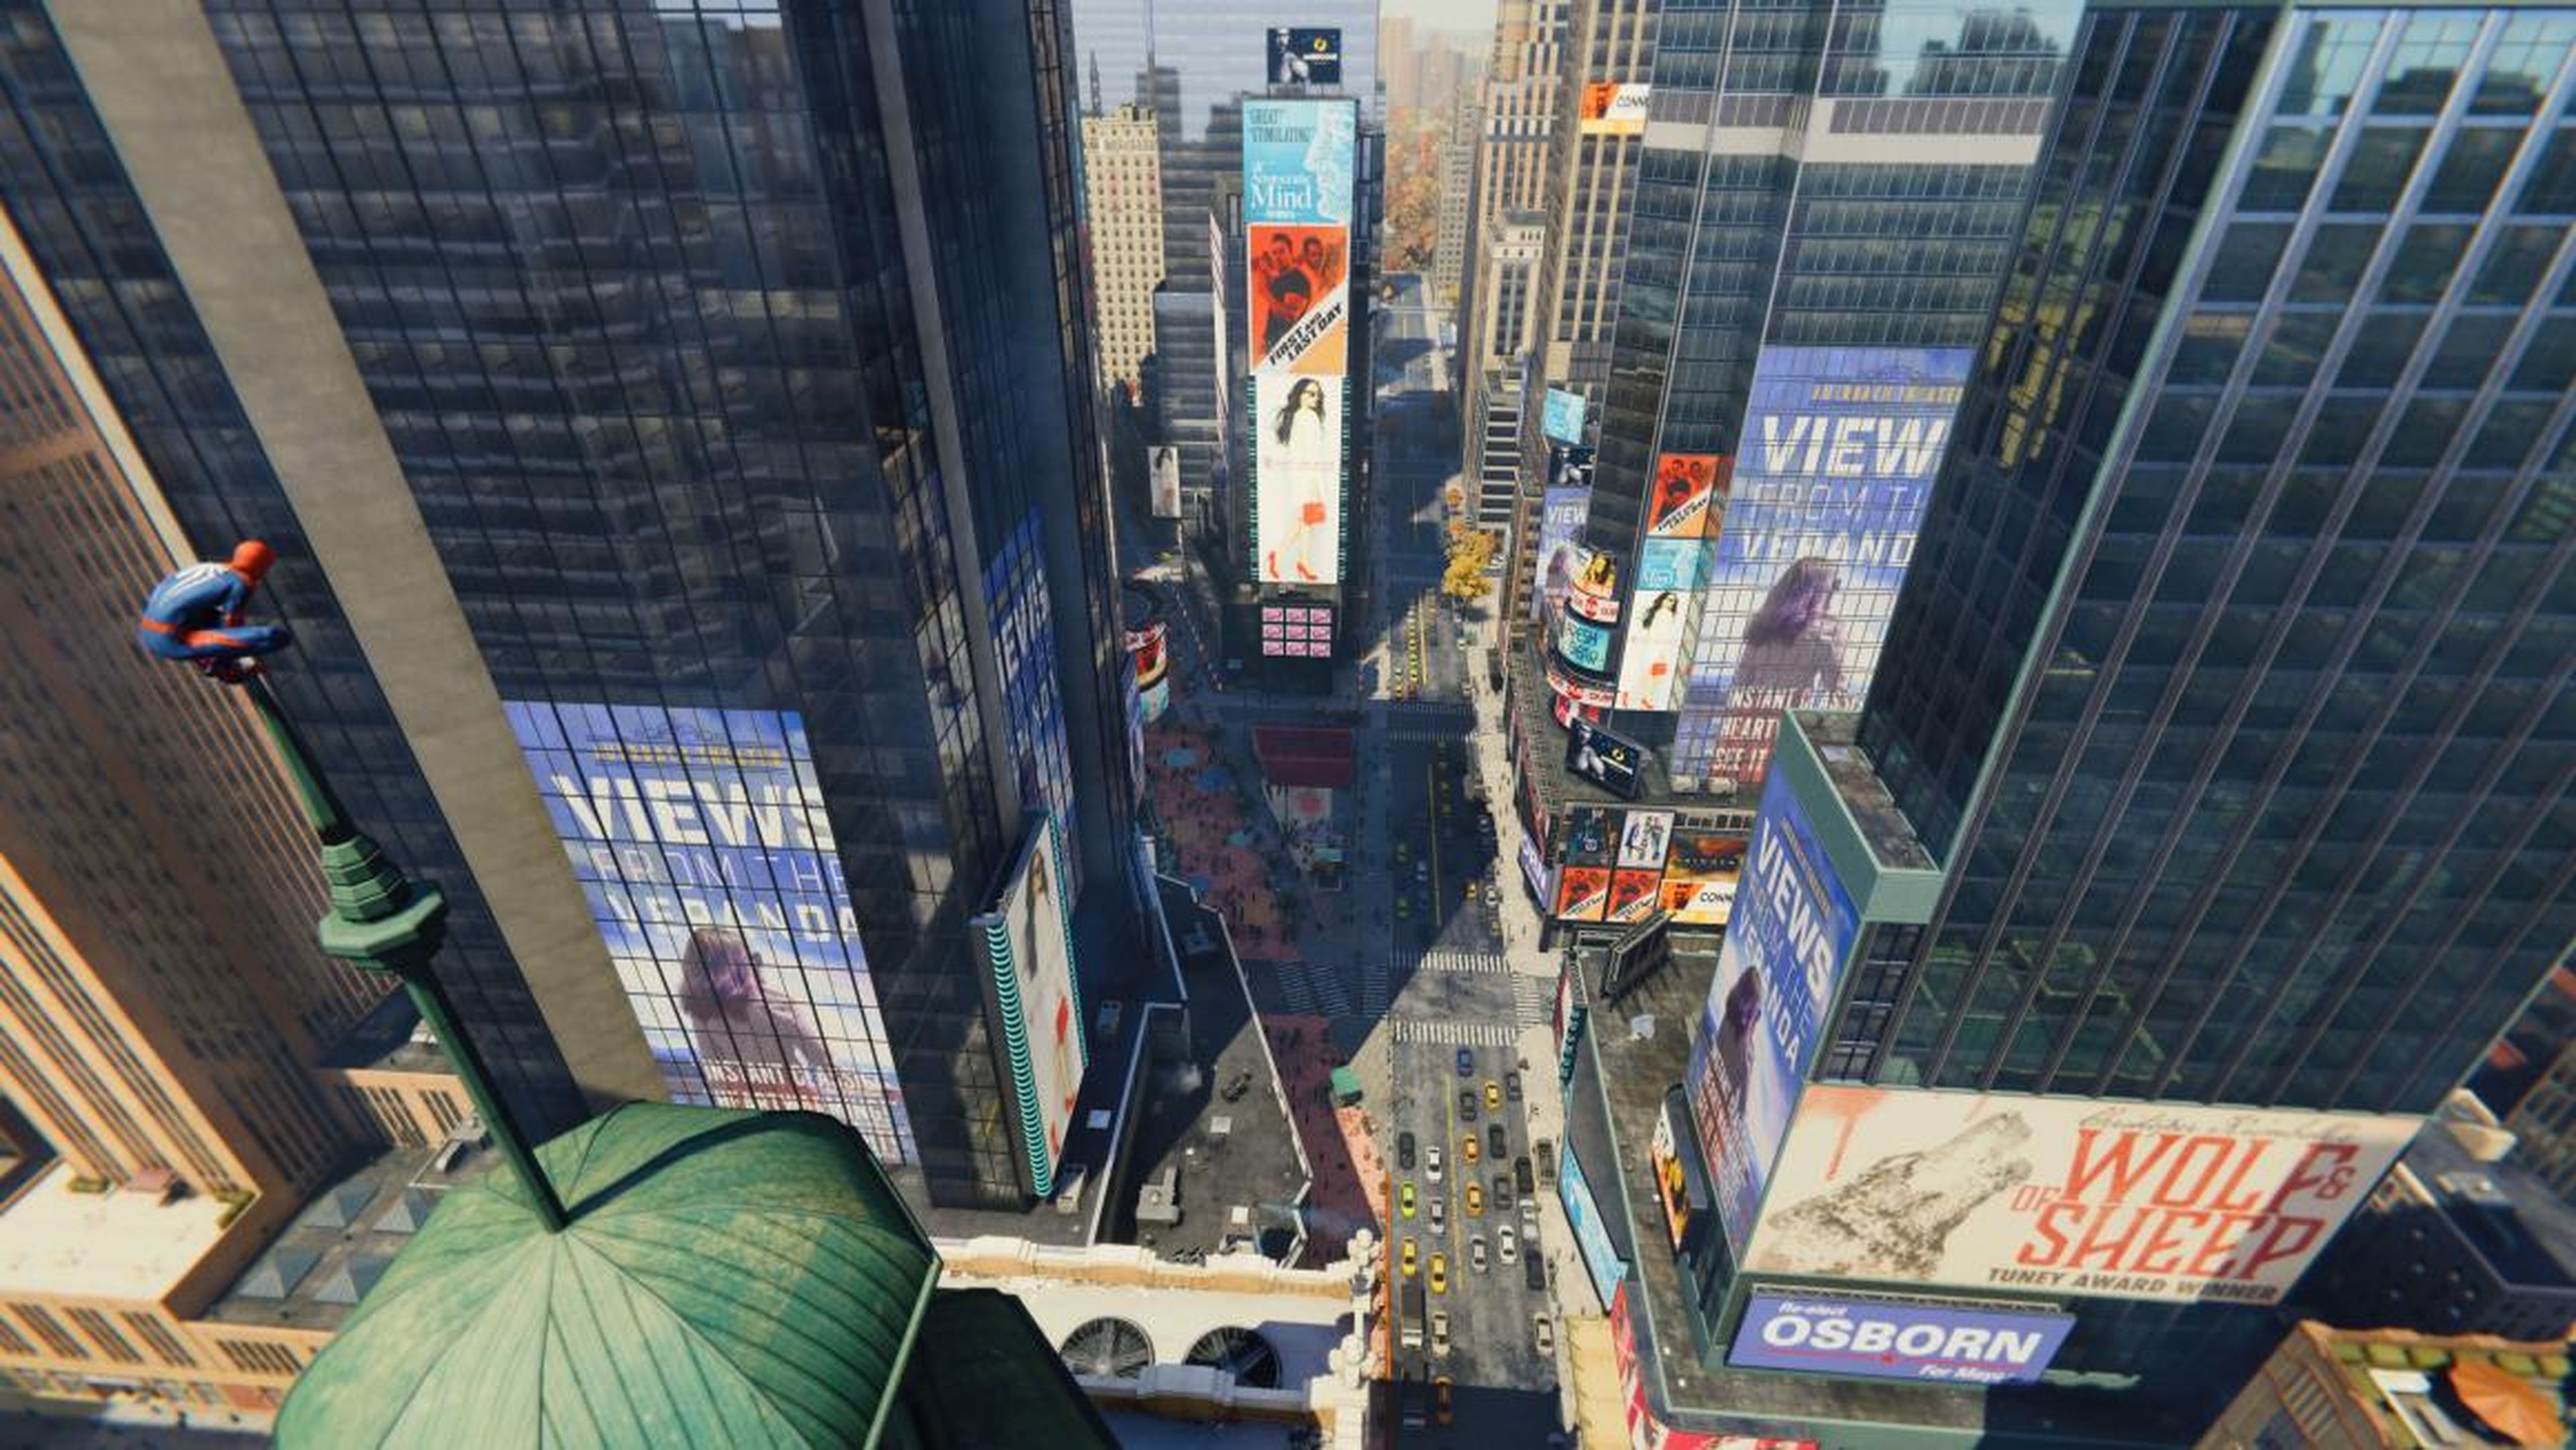 Massive screens with advertisements surround Times Square in-game, just like the real thing.